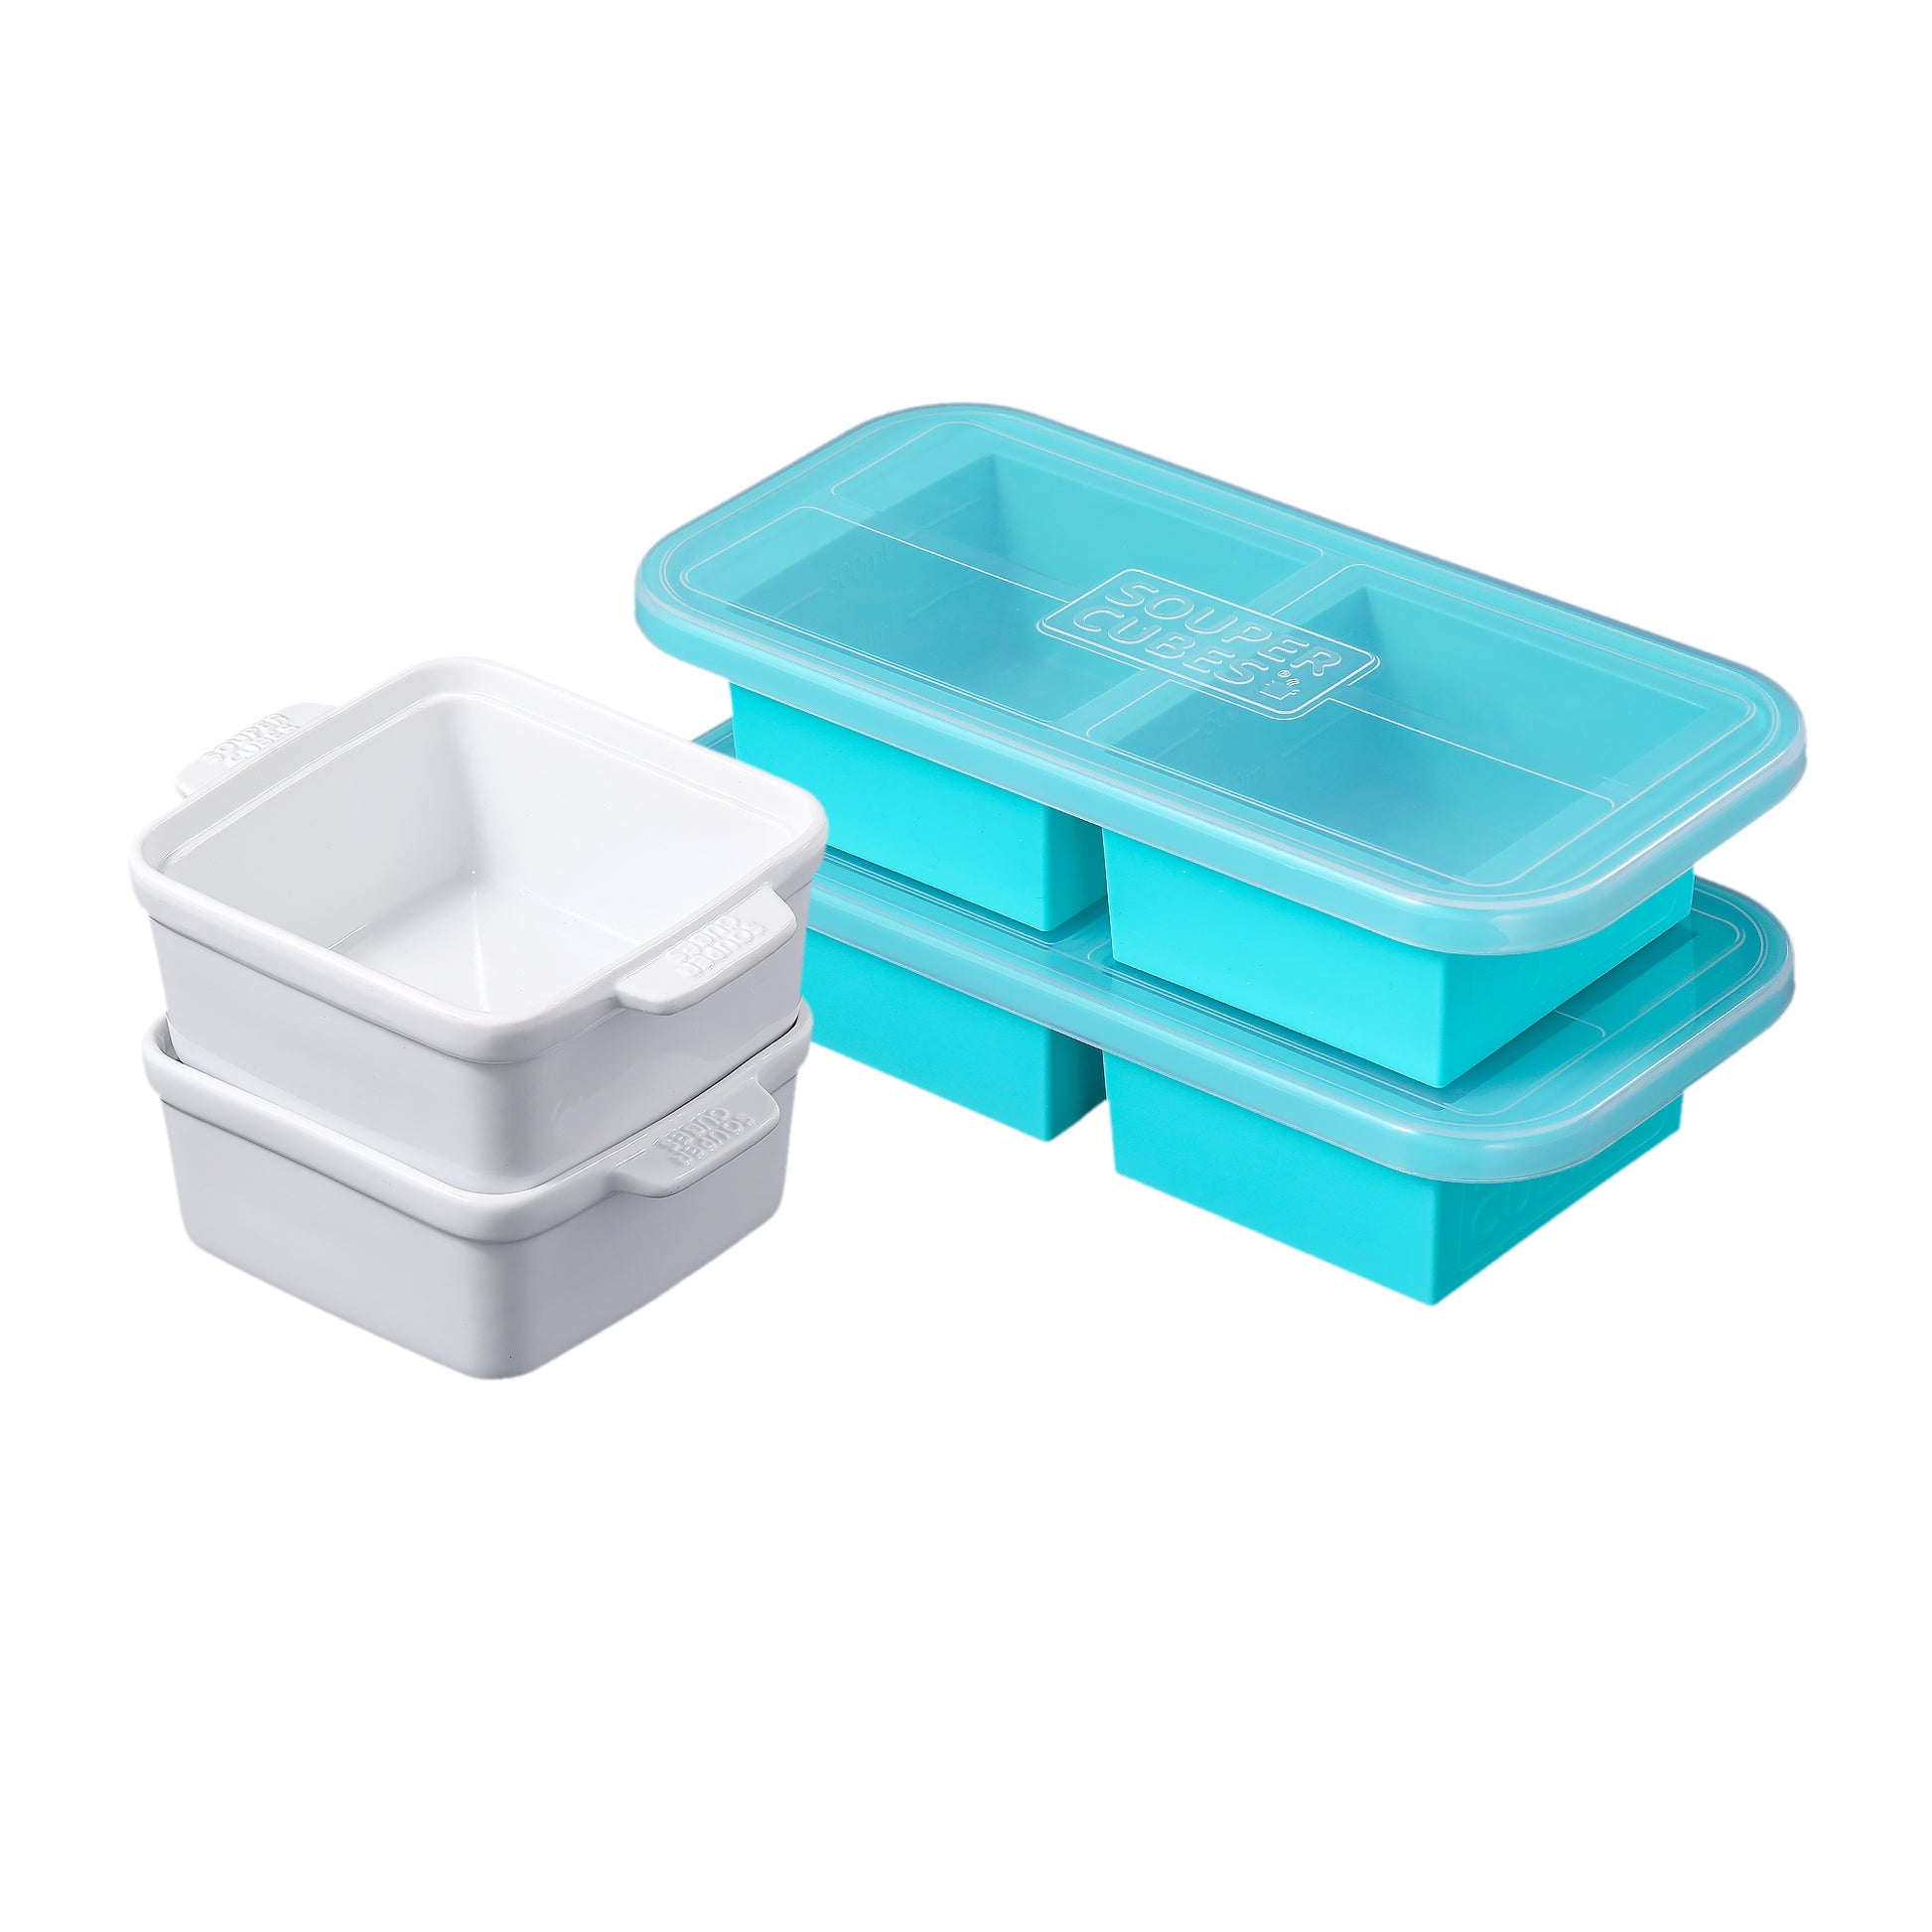 Ice Cube Tray With Lid and extra storage - Demo 